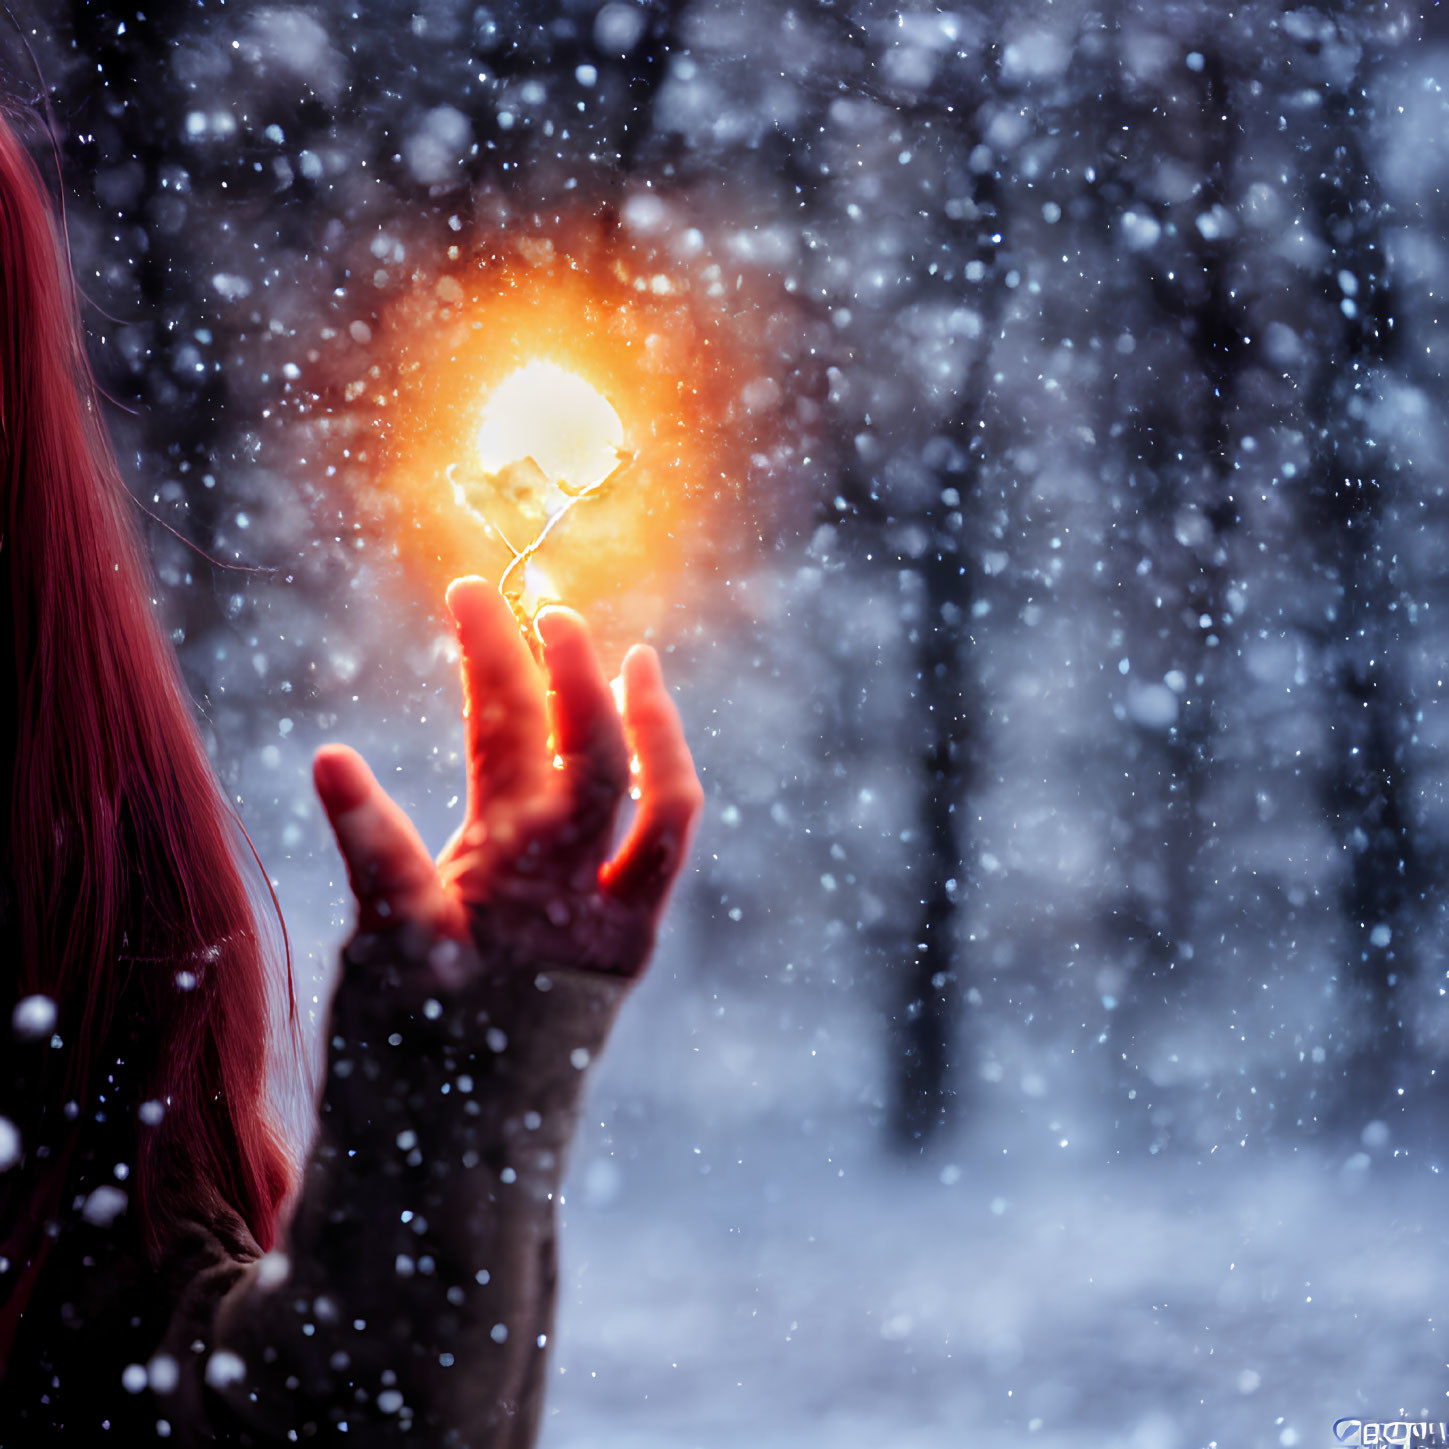 Red-Haired Person Holding Glowing Light Bulb in Snowy Scene